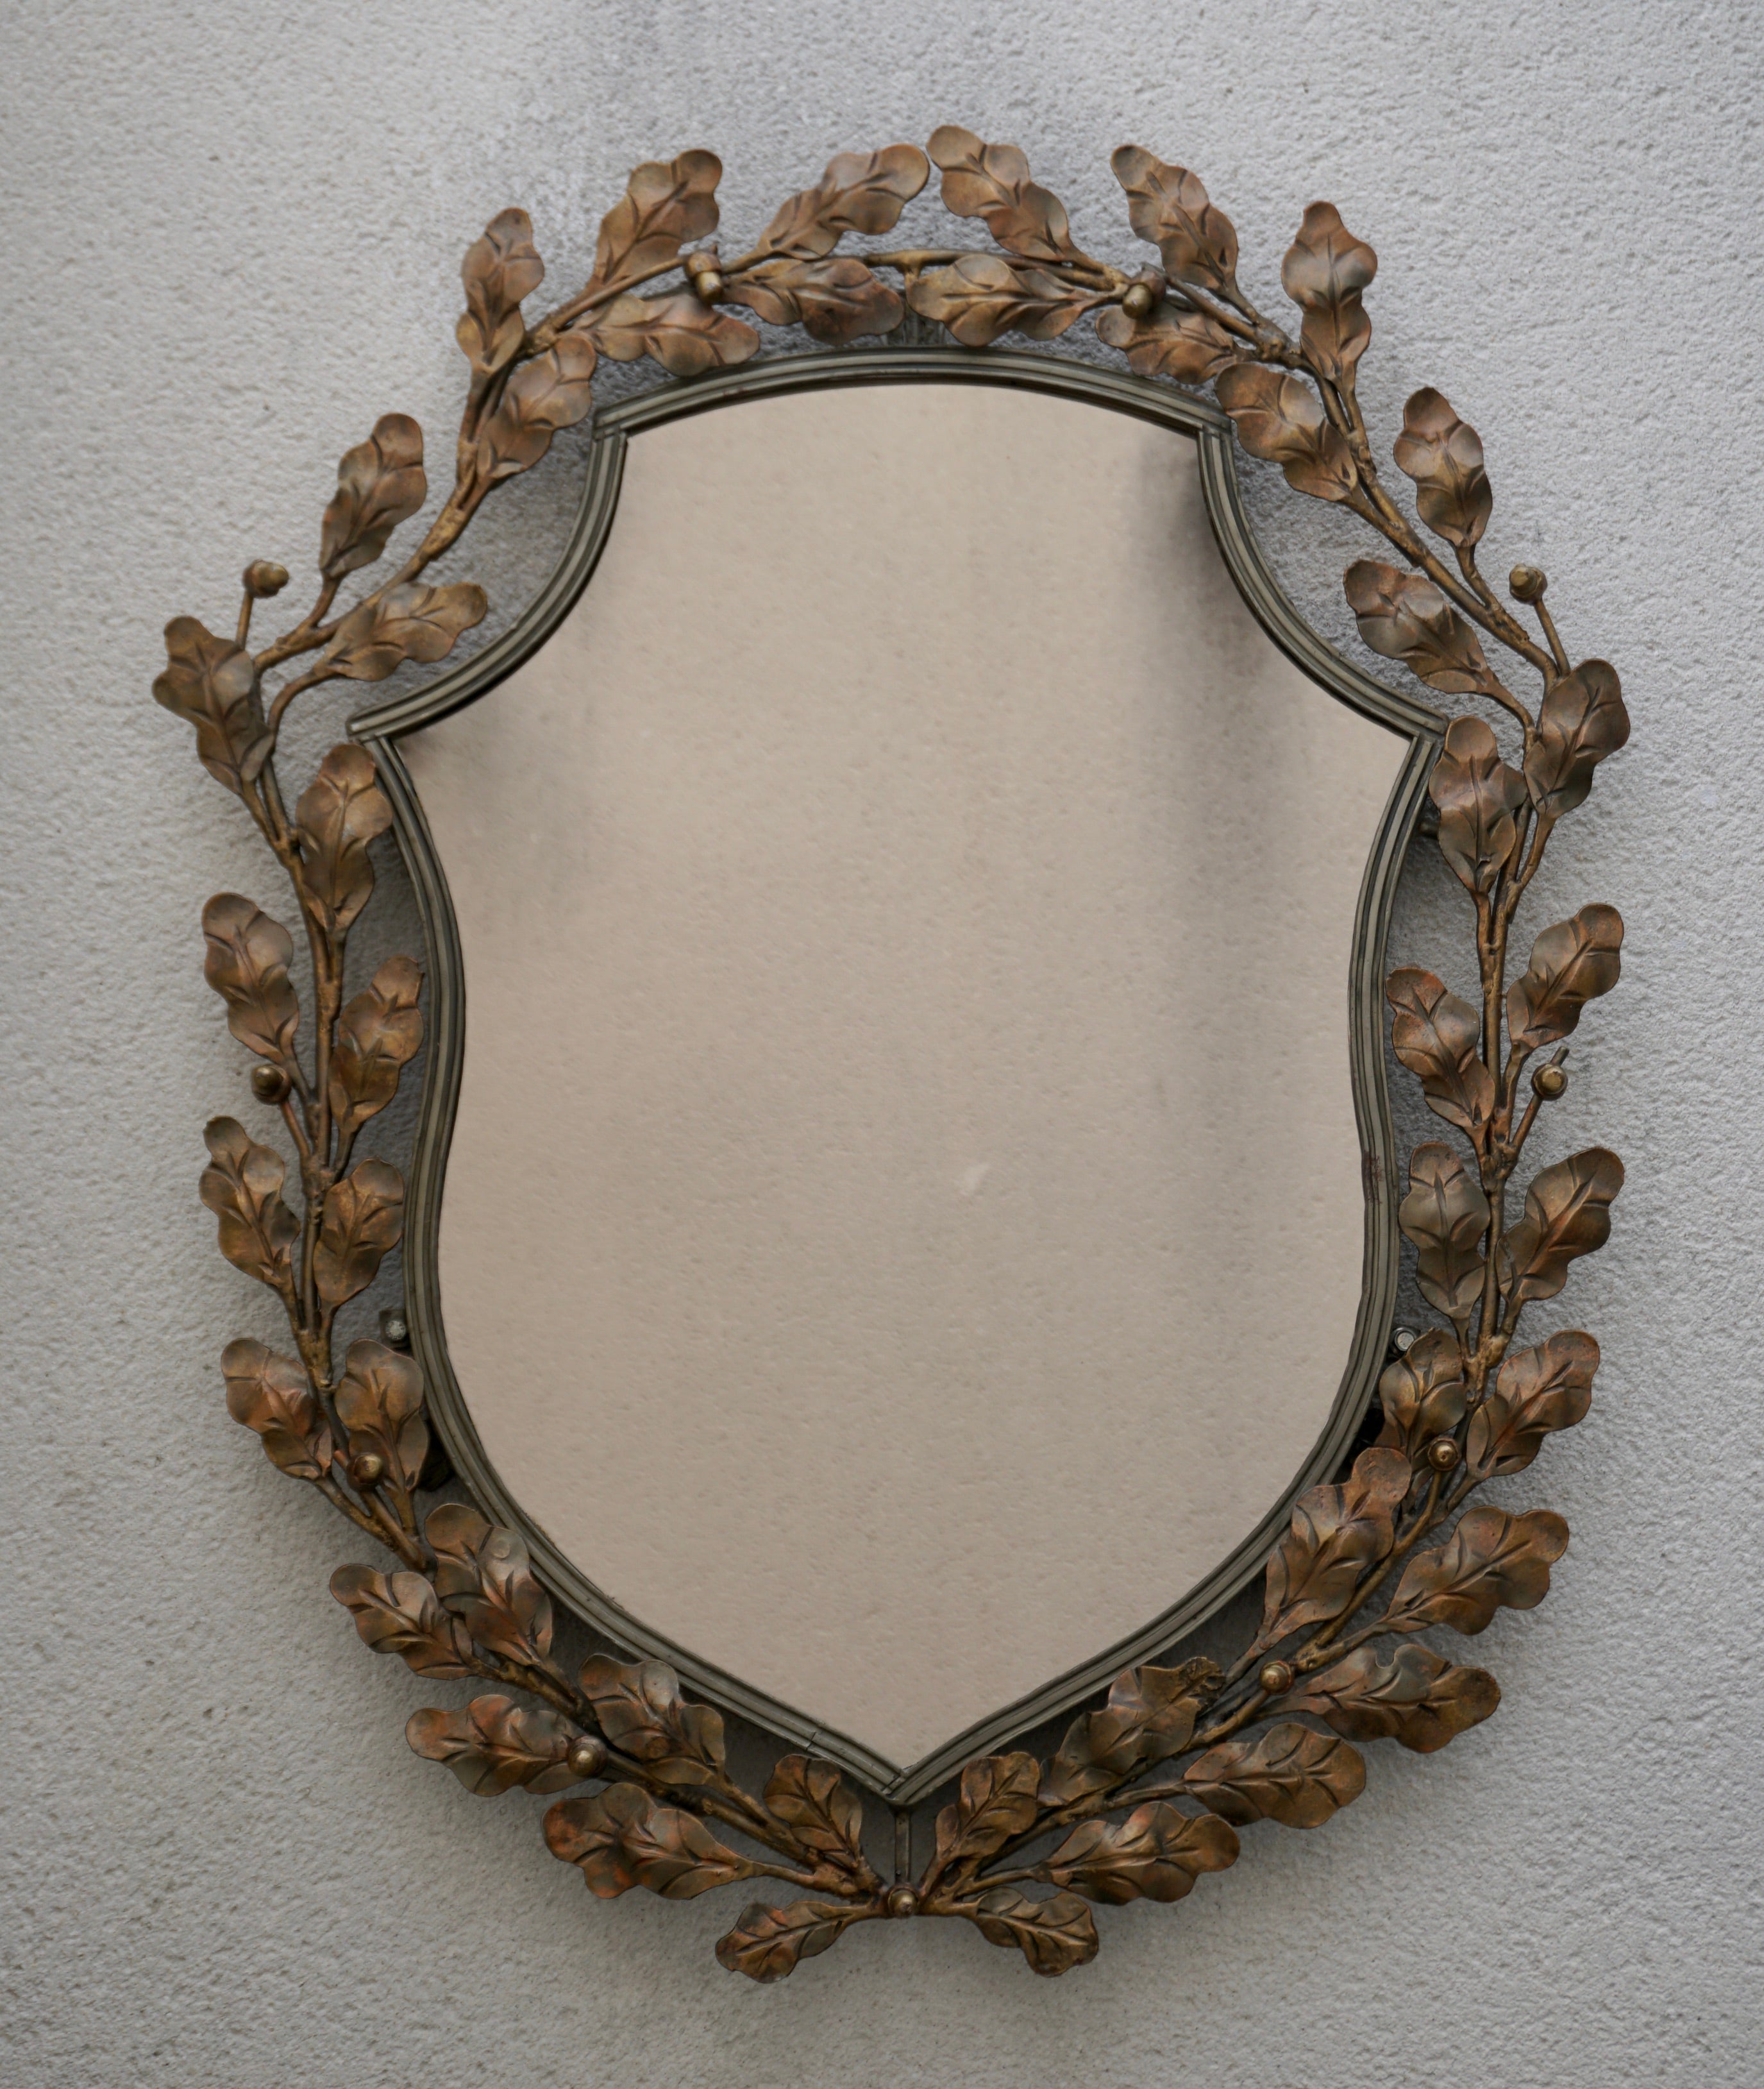 Mid Century Modern vintage oval wall mirror made of gold-colored metal with acorns and leaves, Italy, 1950s.

Beautiful and graceful frame with acorns and leaves in gold color in elliptical shape with mirror glass.We especially love this oval wall